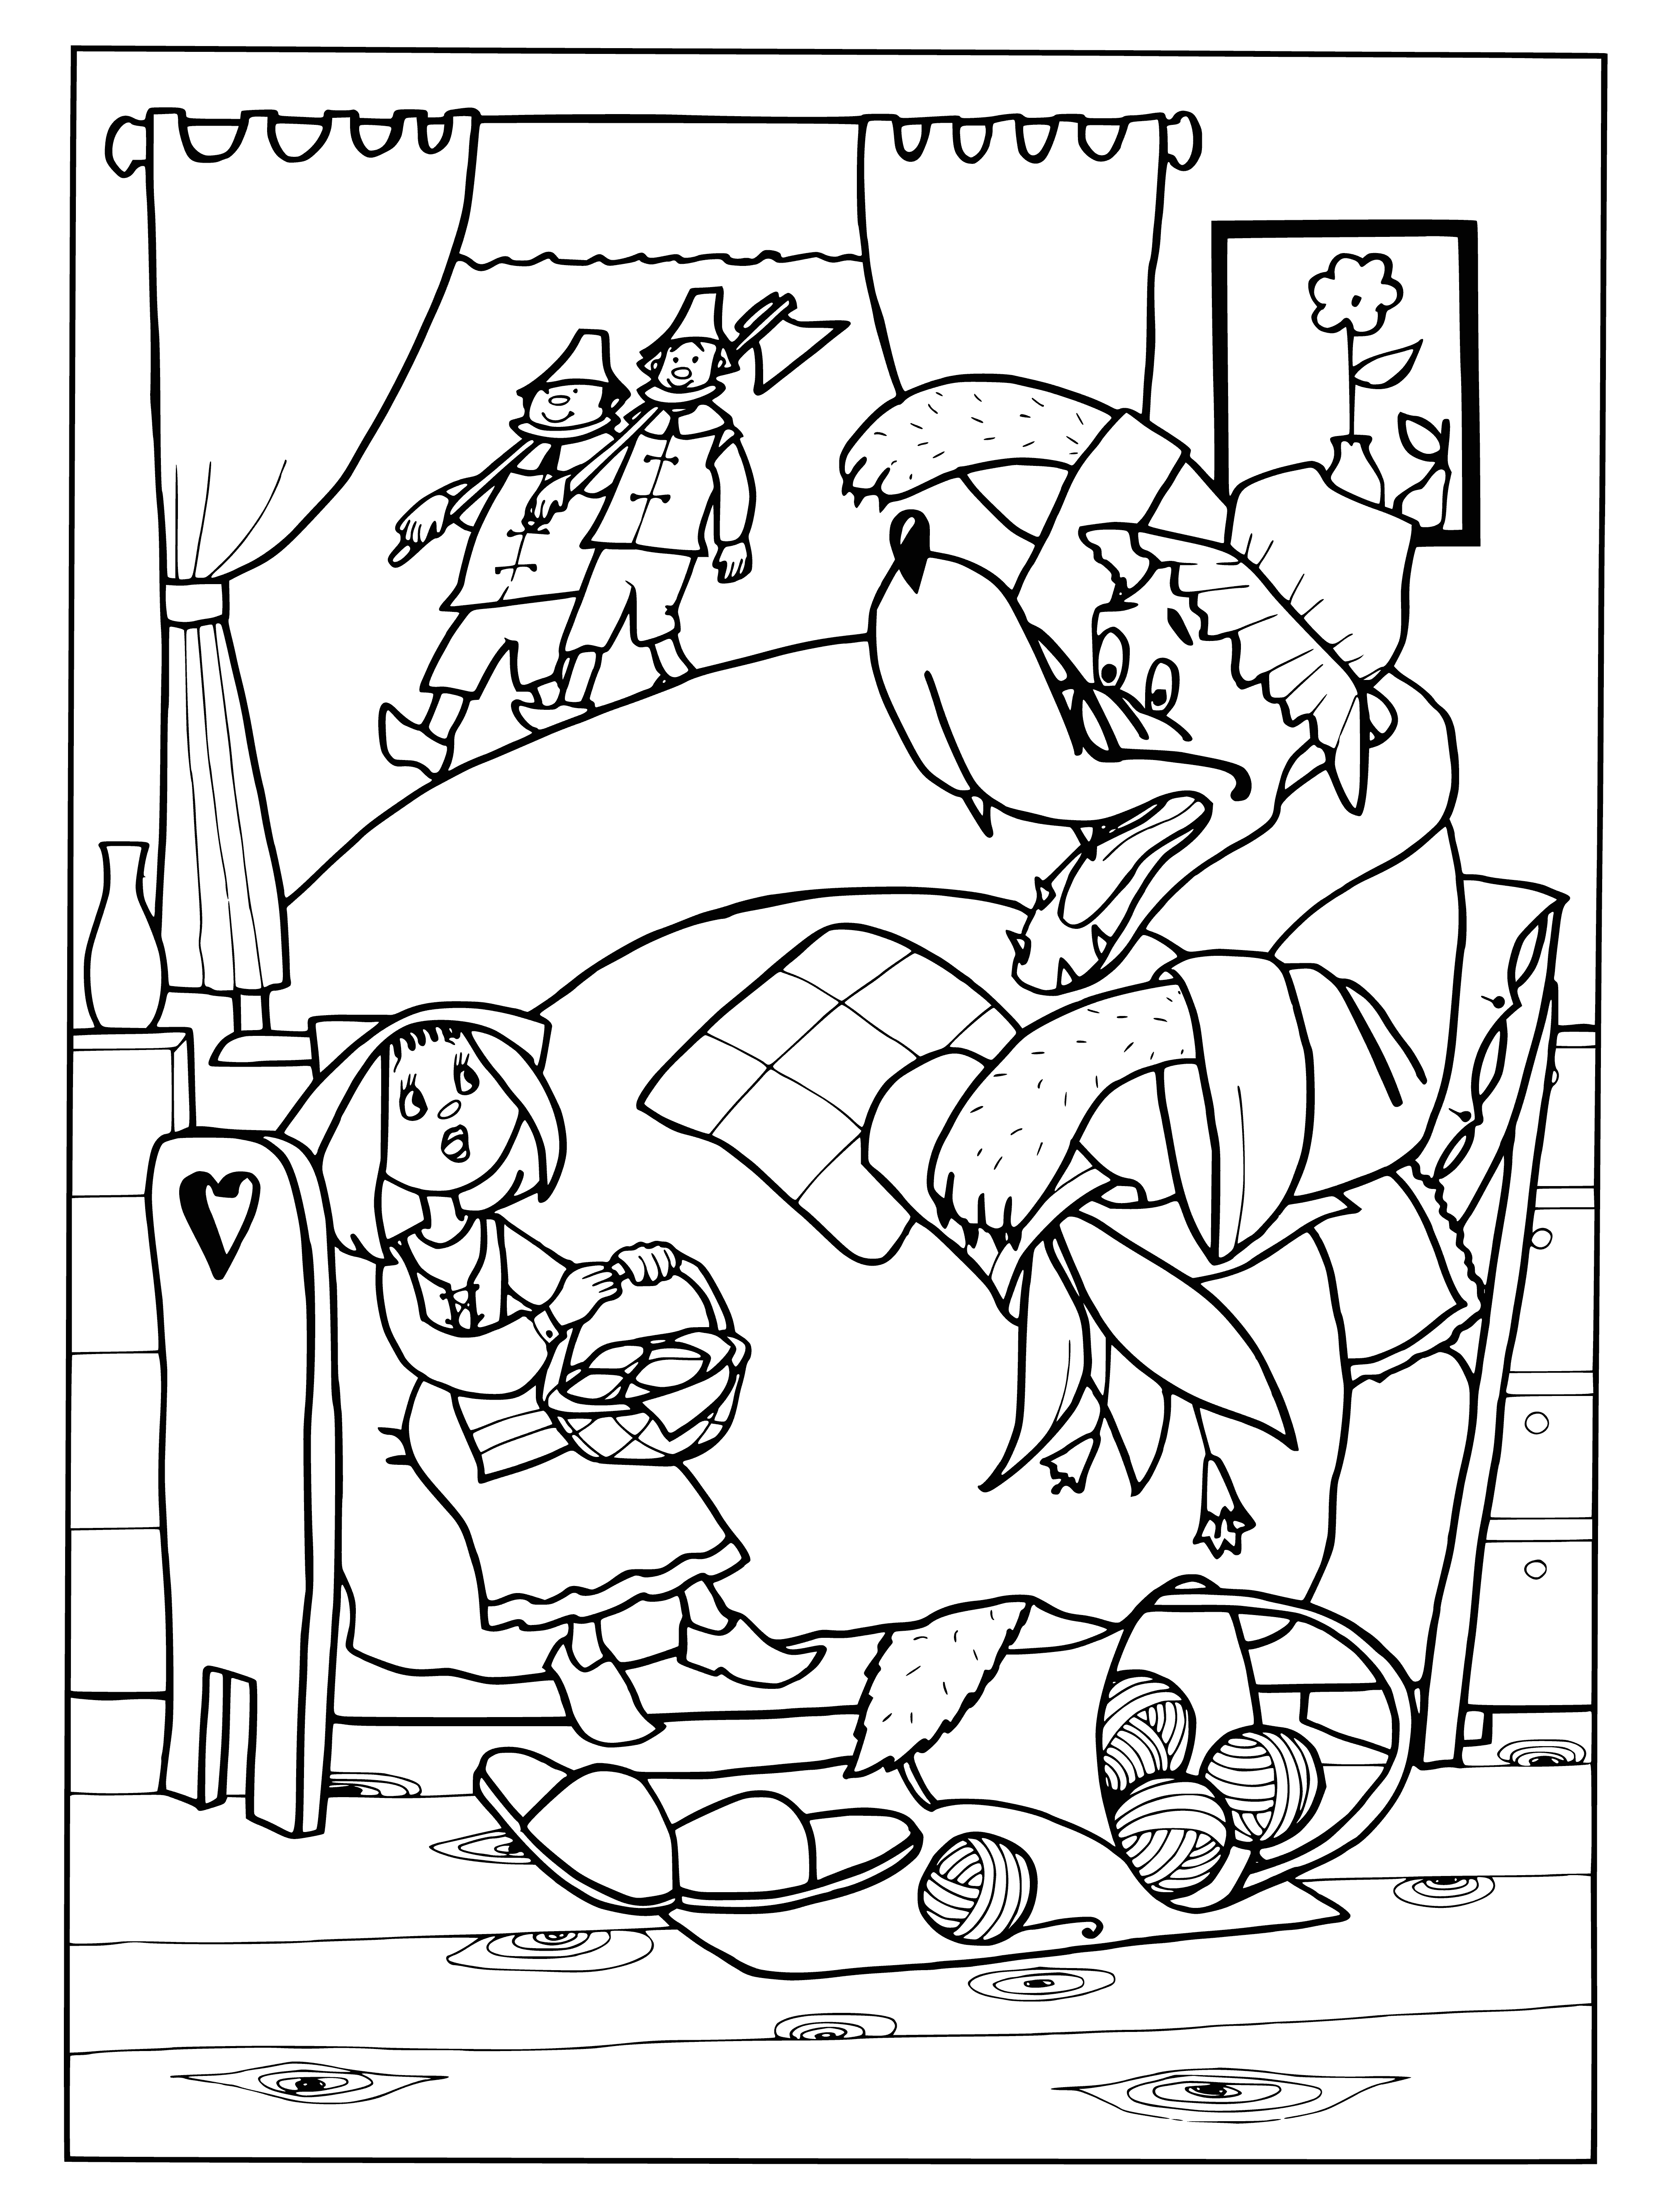 coloring page: Drawing of cartoonish man with huge mouth of teeth about to eat someone- like from a children's book!